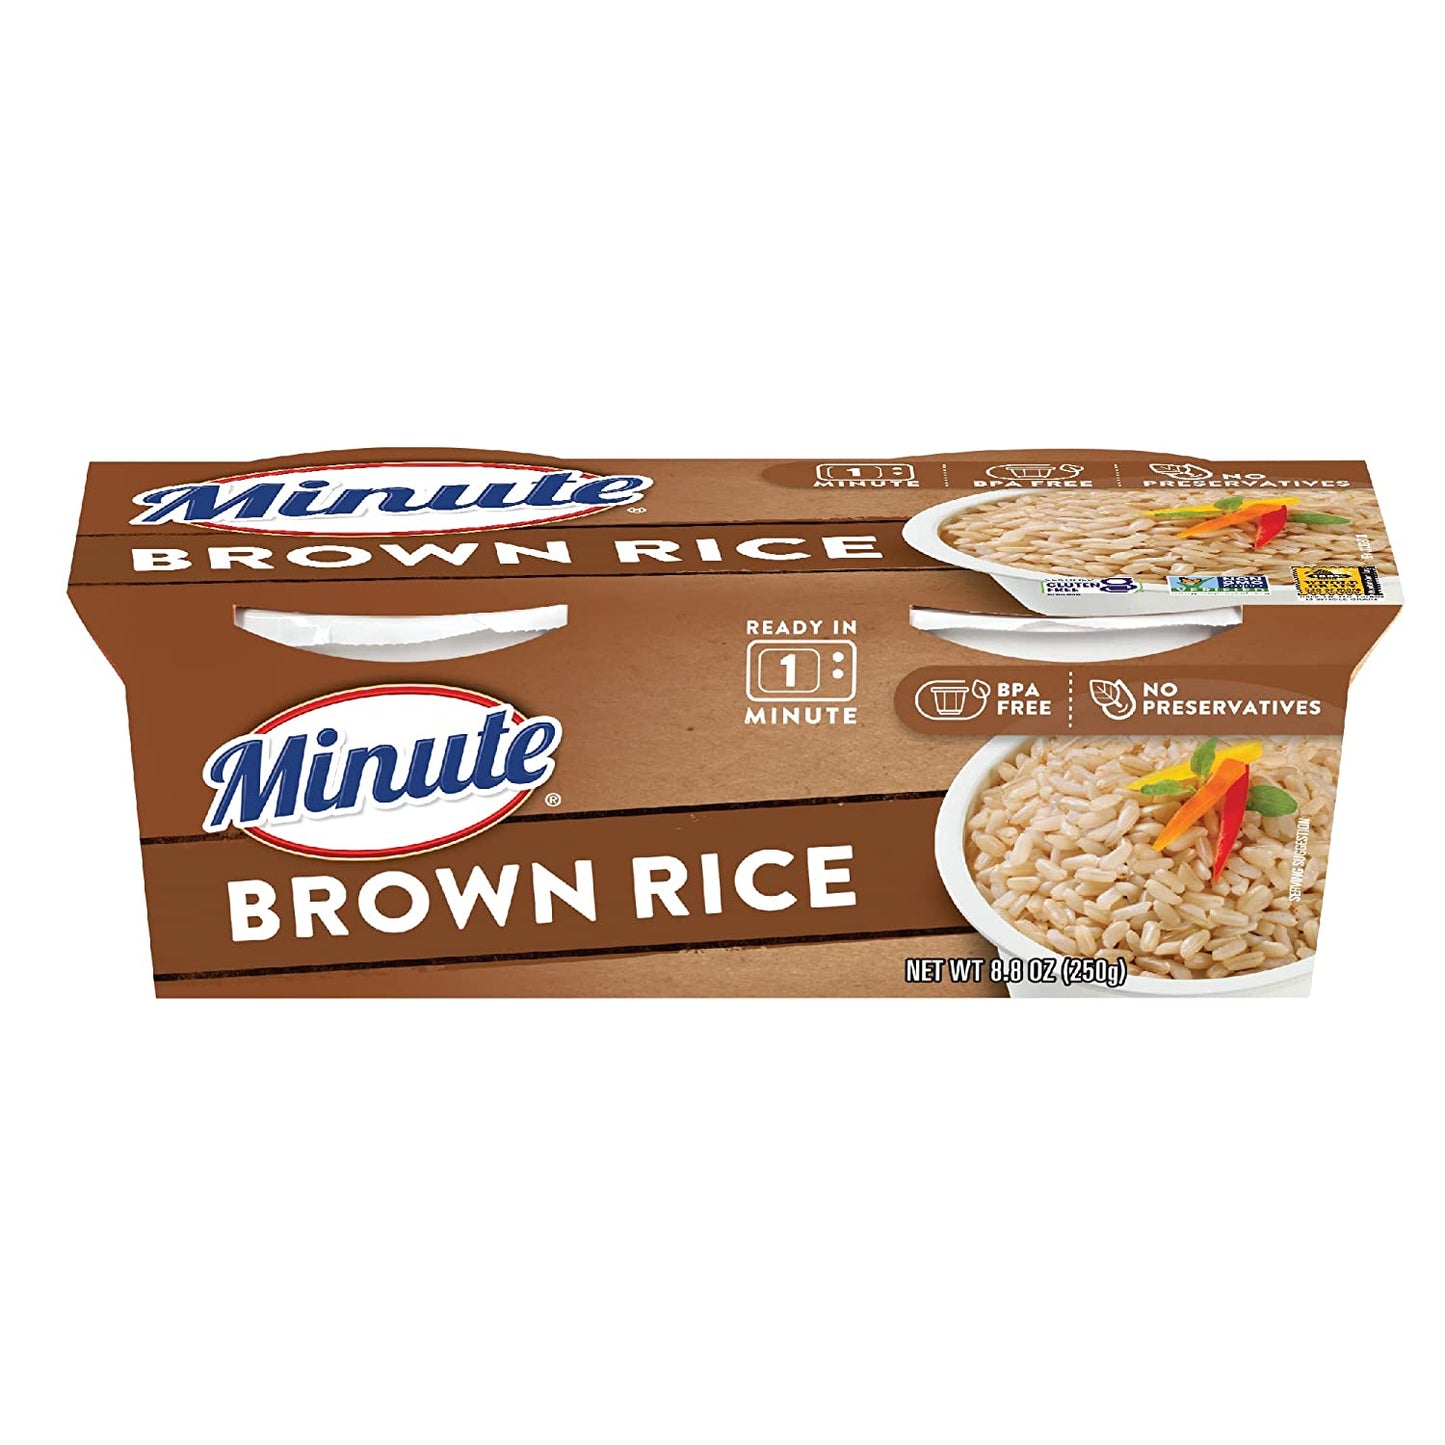 Minute RTS Brown Rice, 2 - 4.4 Ounce Cups (Pack of 8)